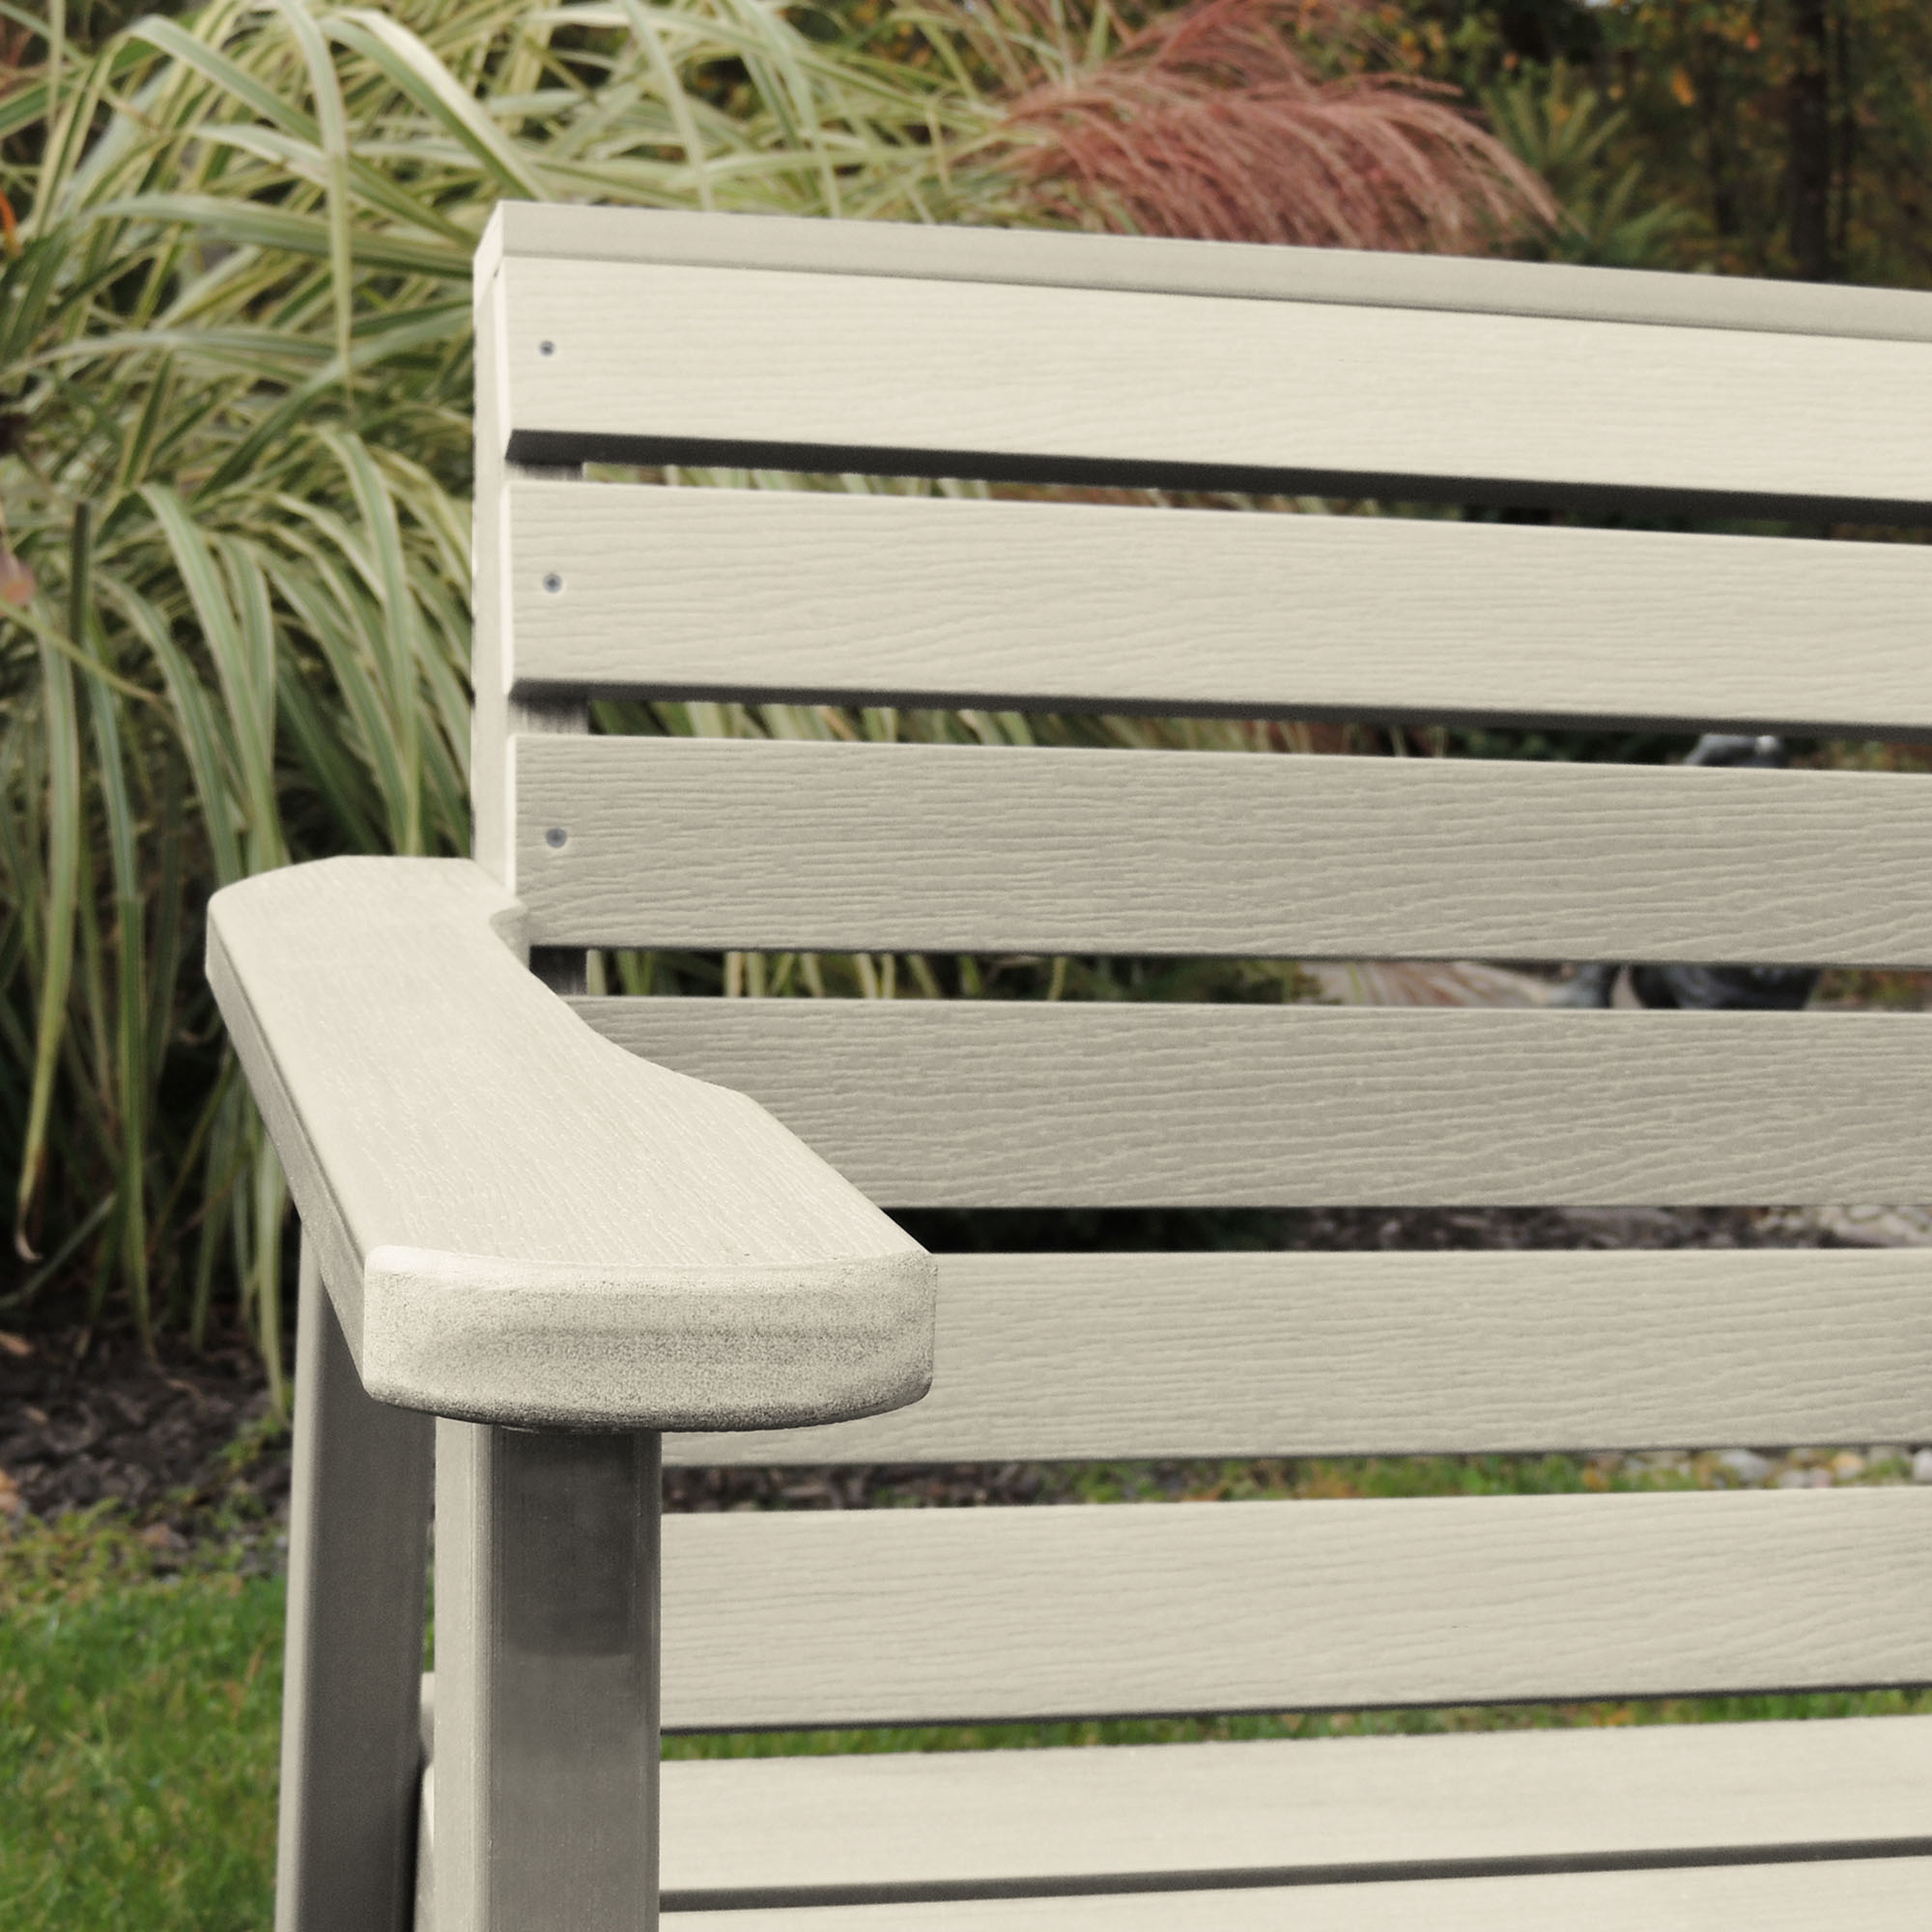 Highwood Weatherly Garden Chair - image 3 of 5